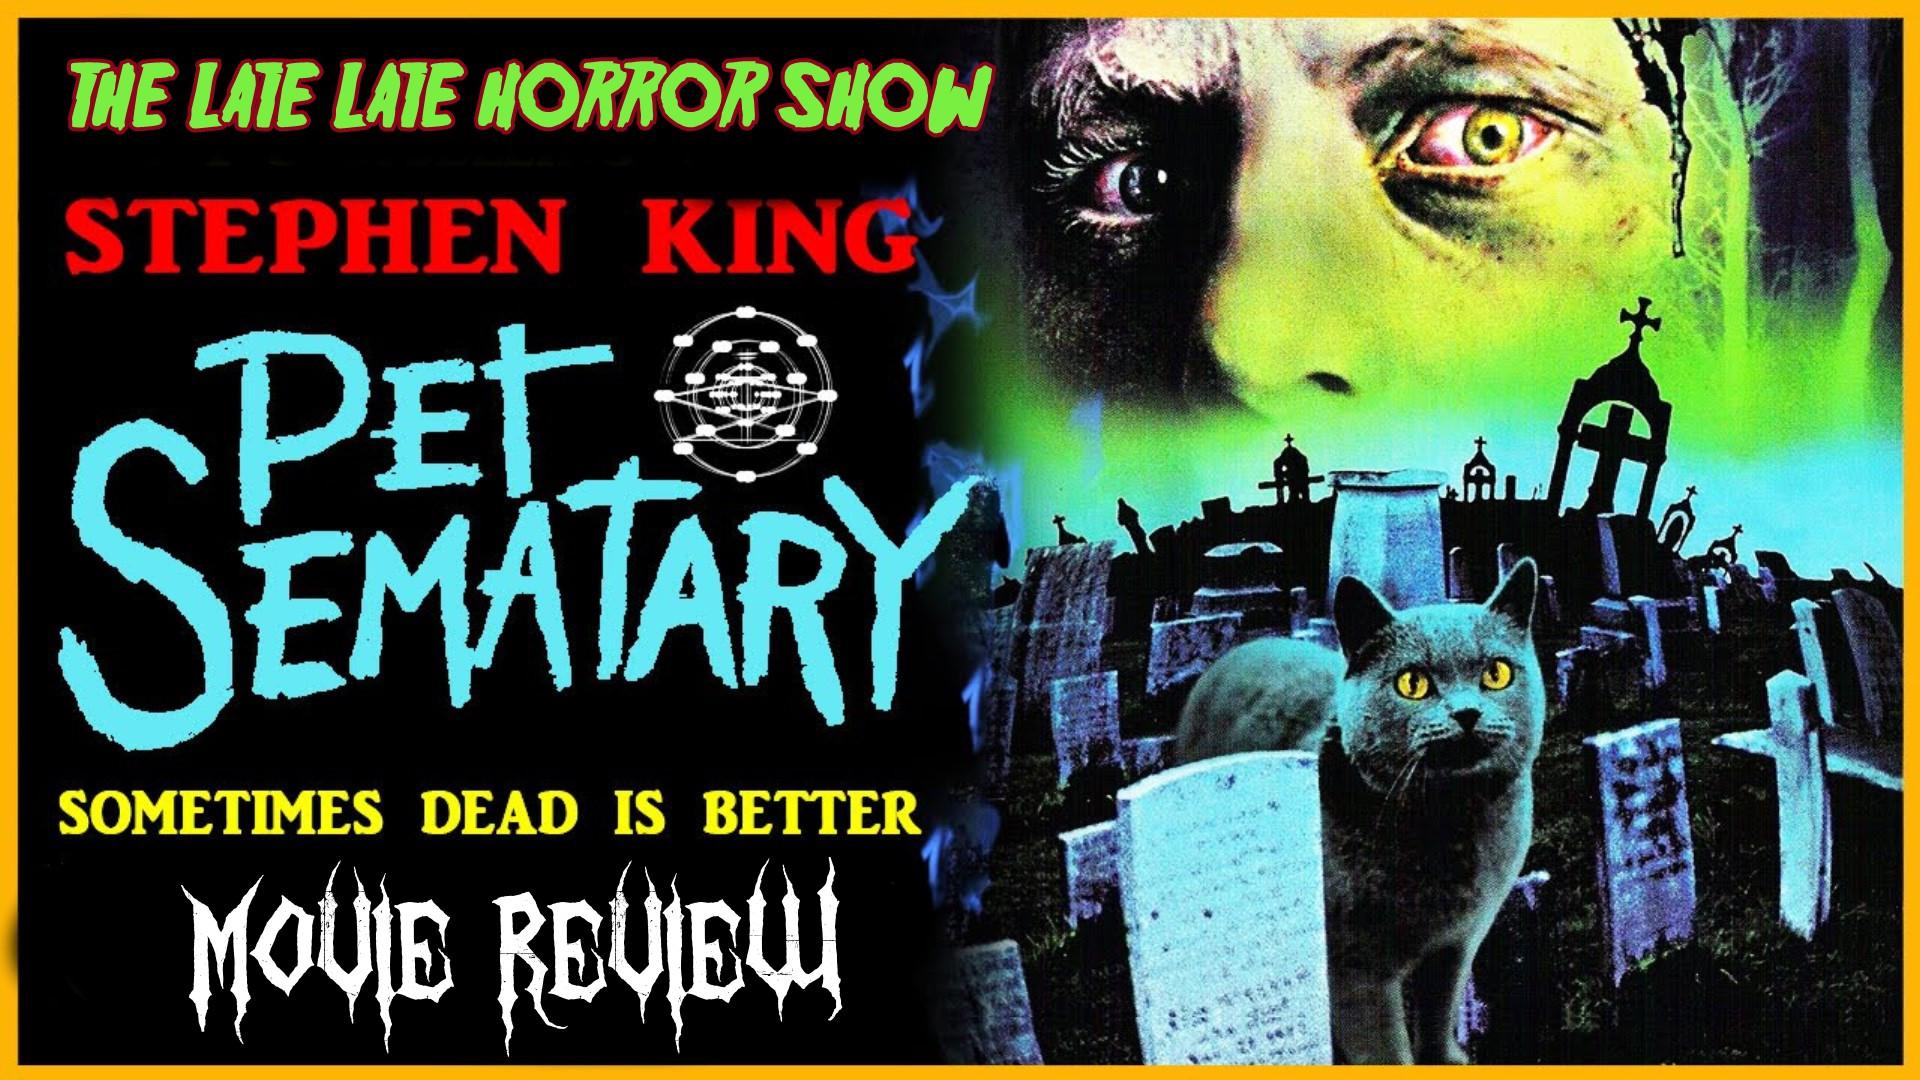 STEPHEN KING PET SEMATARY 1989 MOVIE REVIEW RANT